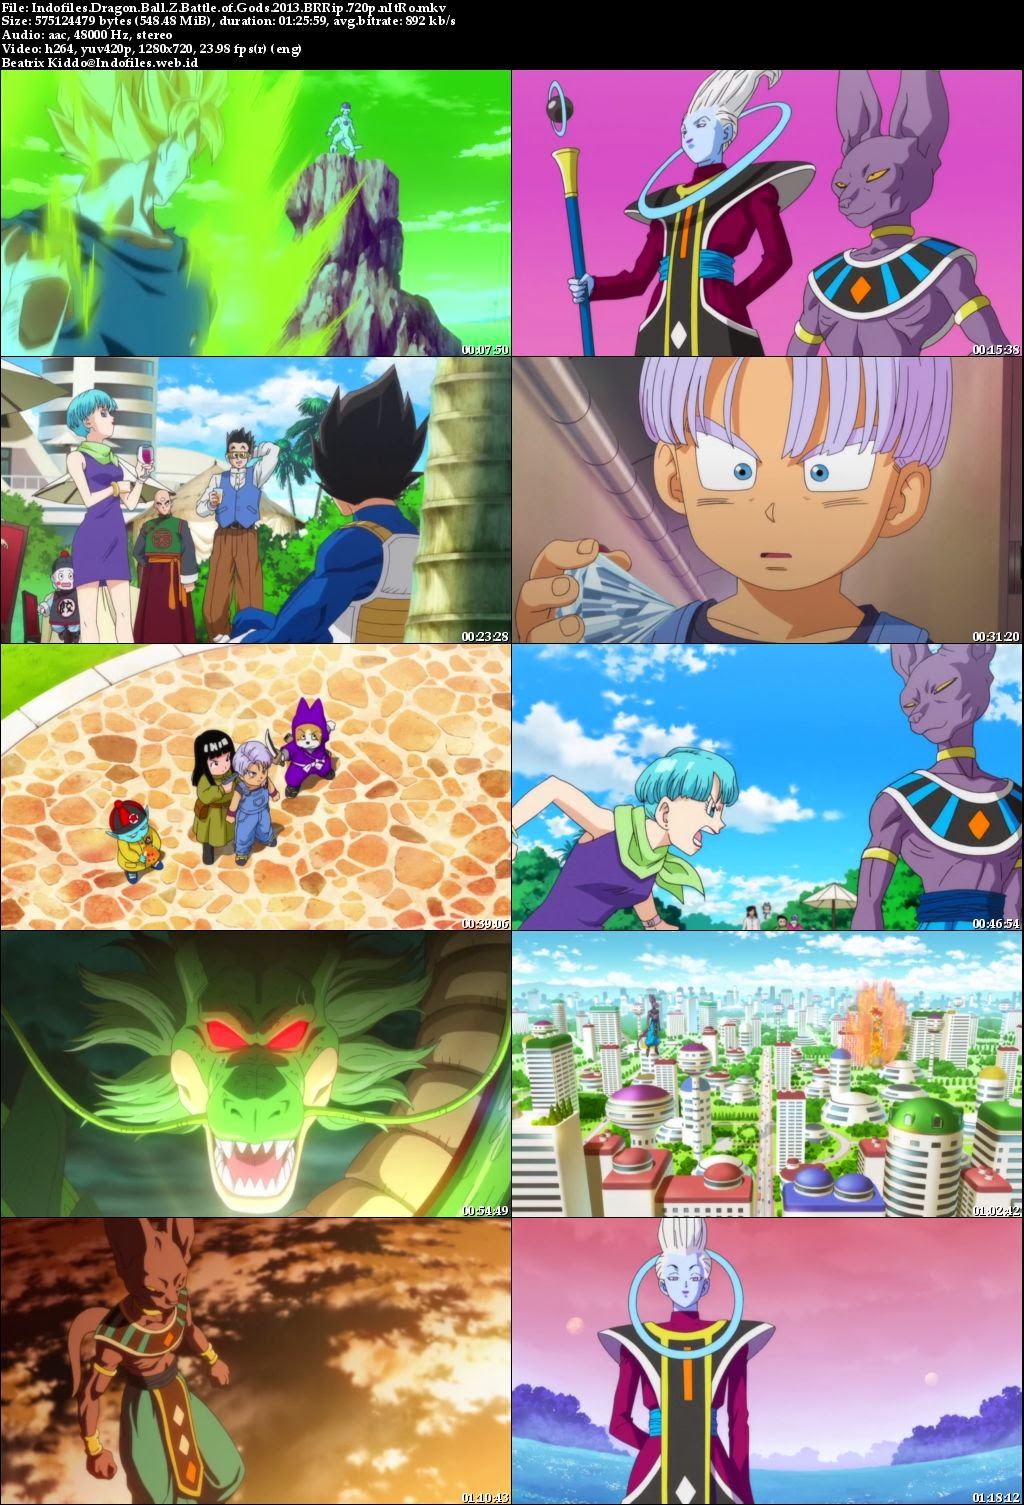 dragon ball z battle of gods full movie in tamil dubbed download